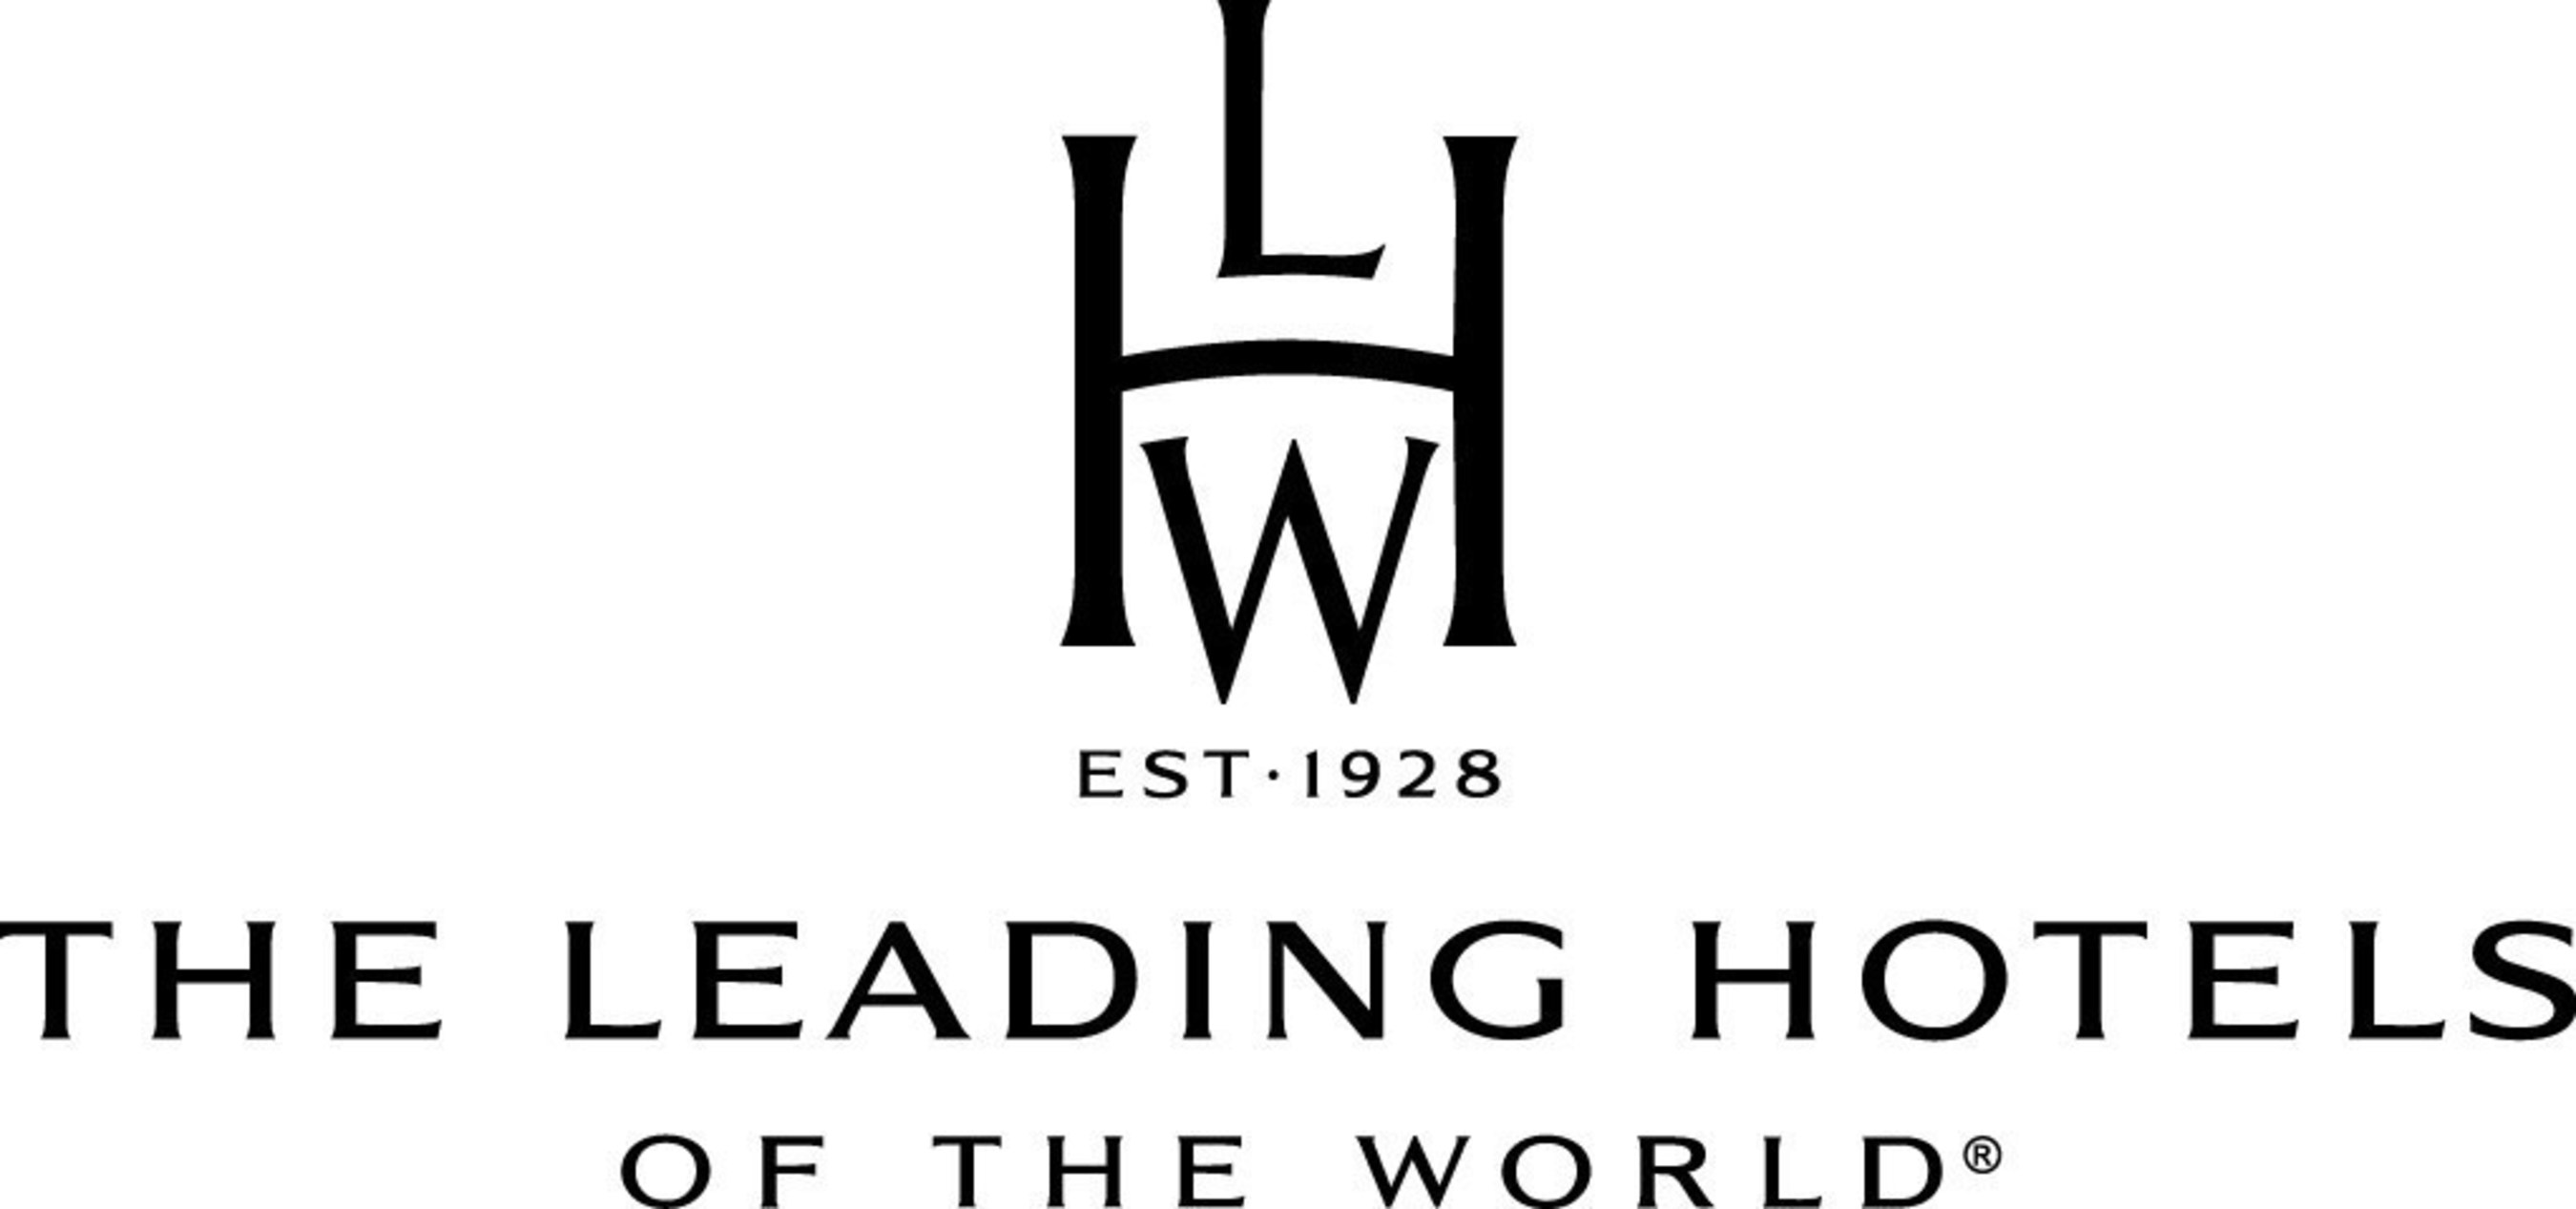 The Leading Hotels of The World logo